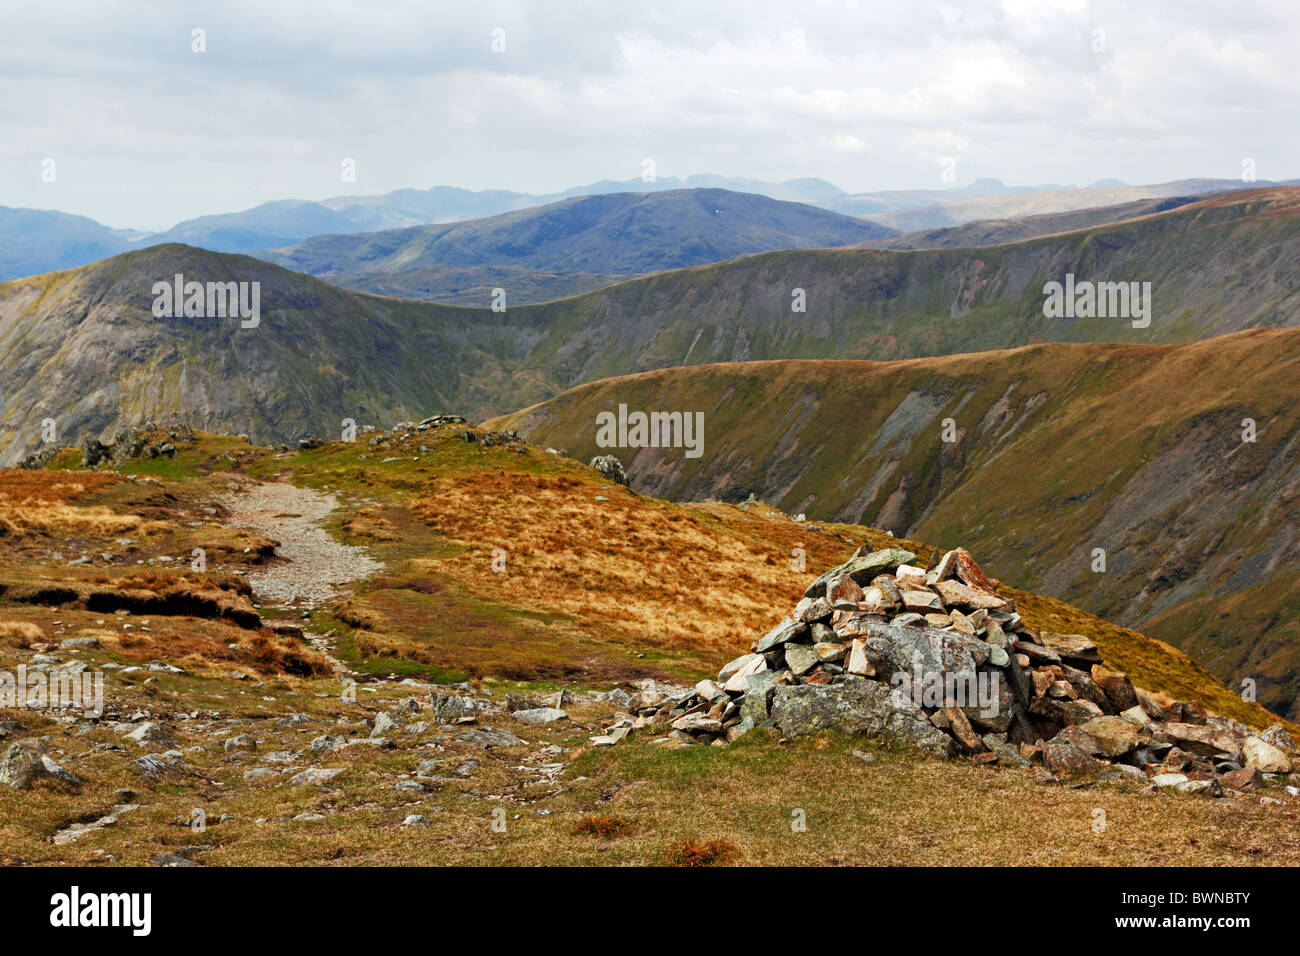 Cairn on the path to the summit of Harter Fell in the Lake District National Park, Cumbria, England. Stock Photo